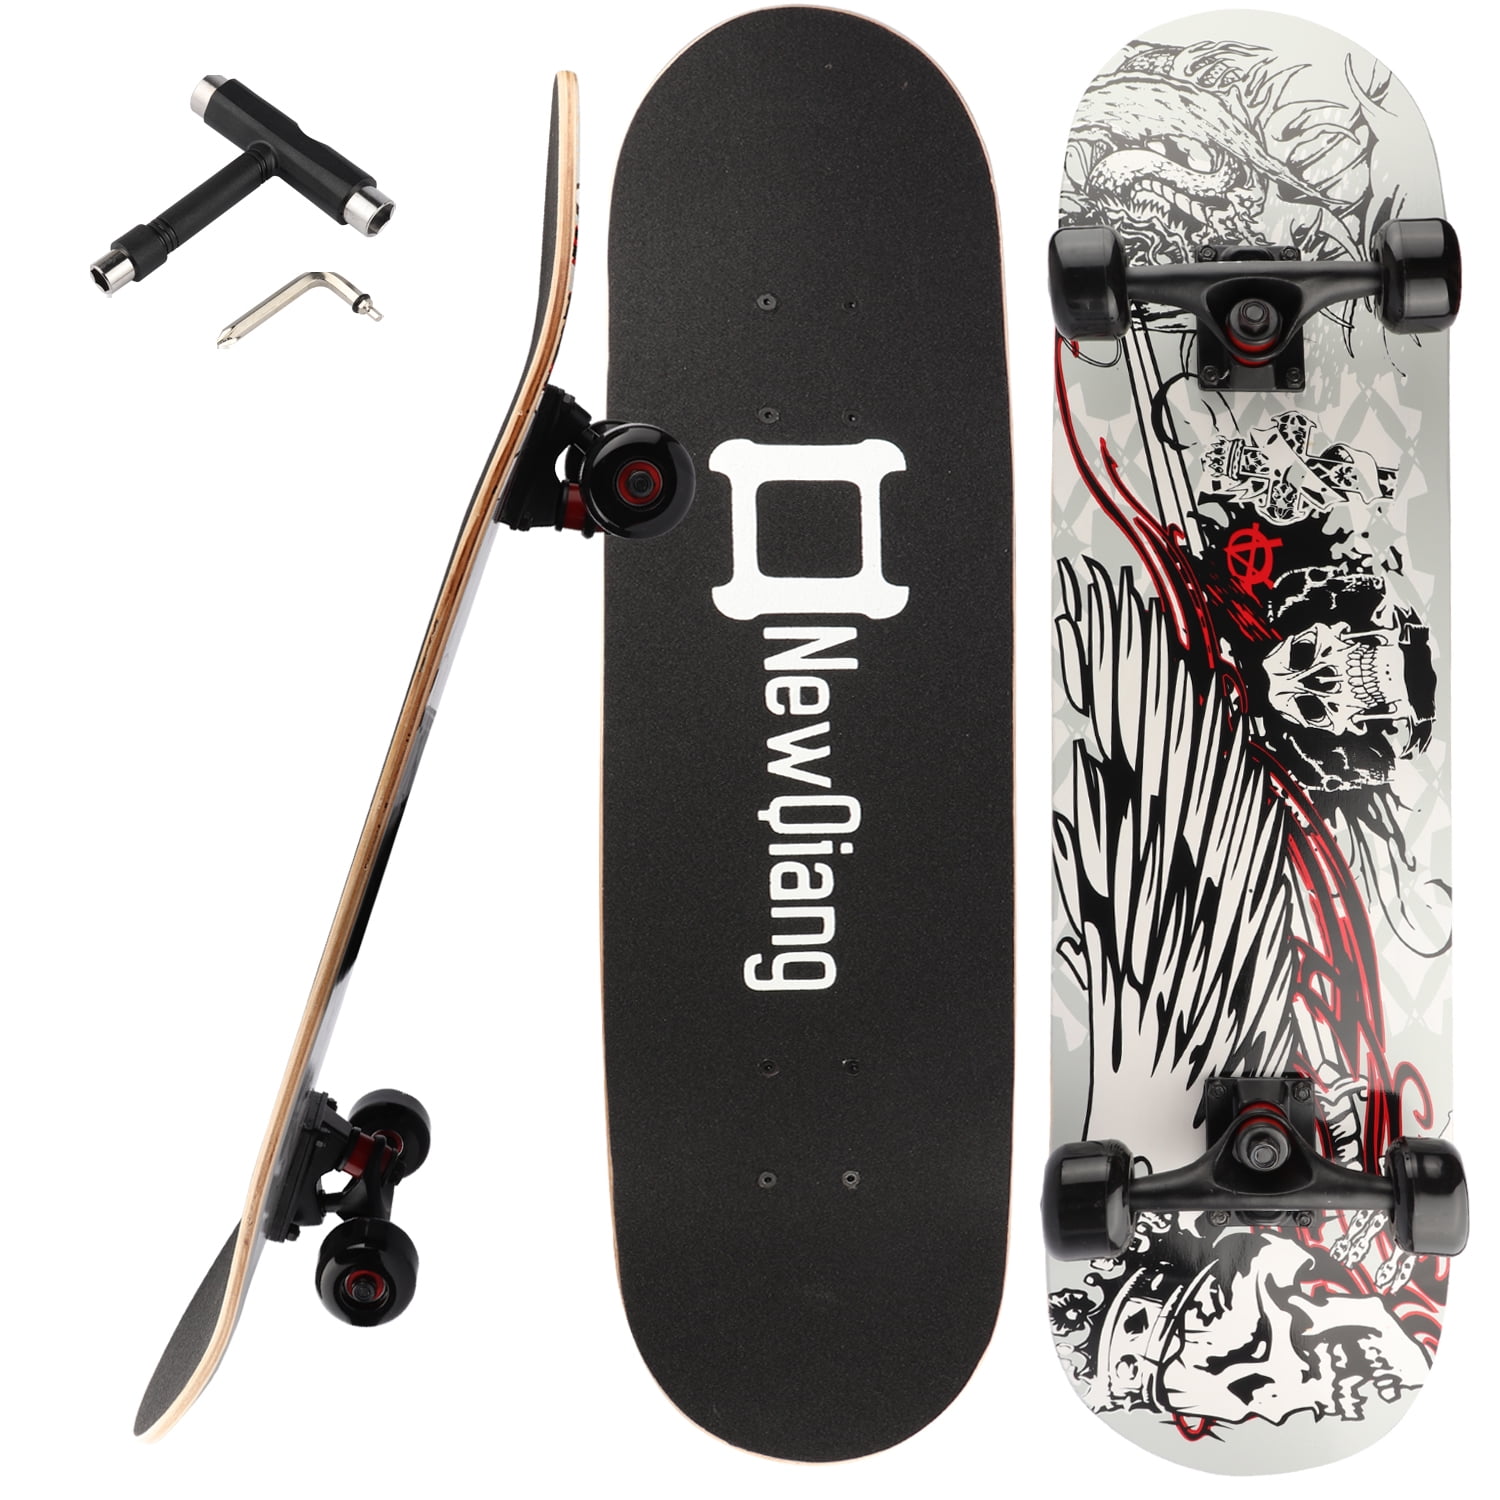 Twisted Luipaard schade Skateboards Complete for Adult Youth Kid and Beginner - 31" Double Kick  Concave Street Skateboard 8 Layer Alpine Hard Rock Maple Deck ABEC-9  Bearings Includes T-Tool - Walmart.com